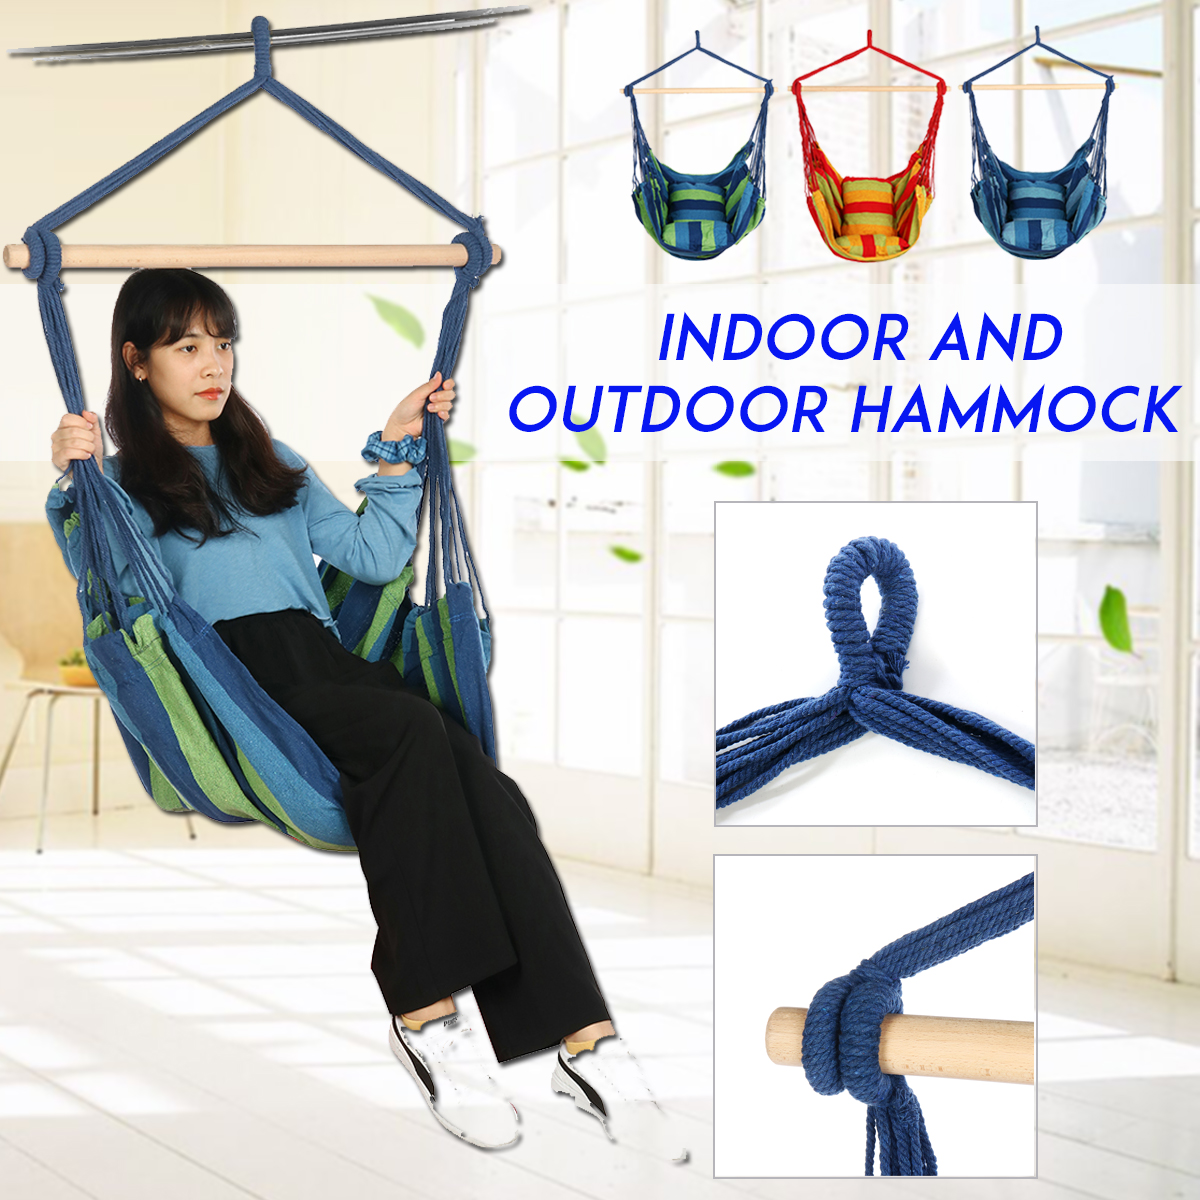 Hammock-Chair-Camping-Hanging-Rope-Swing-Outdoor-Picnic-Hiking-Travel-1697620-1